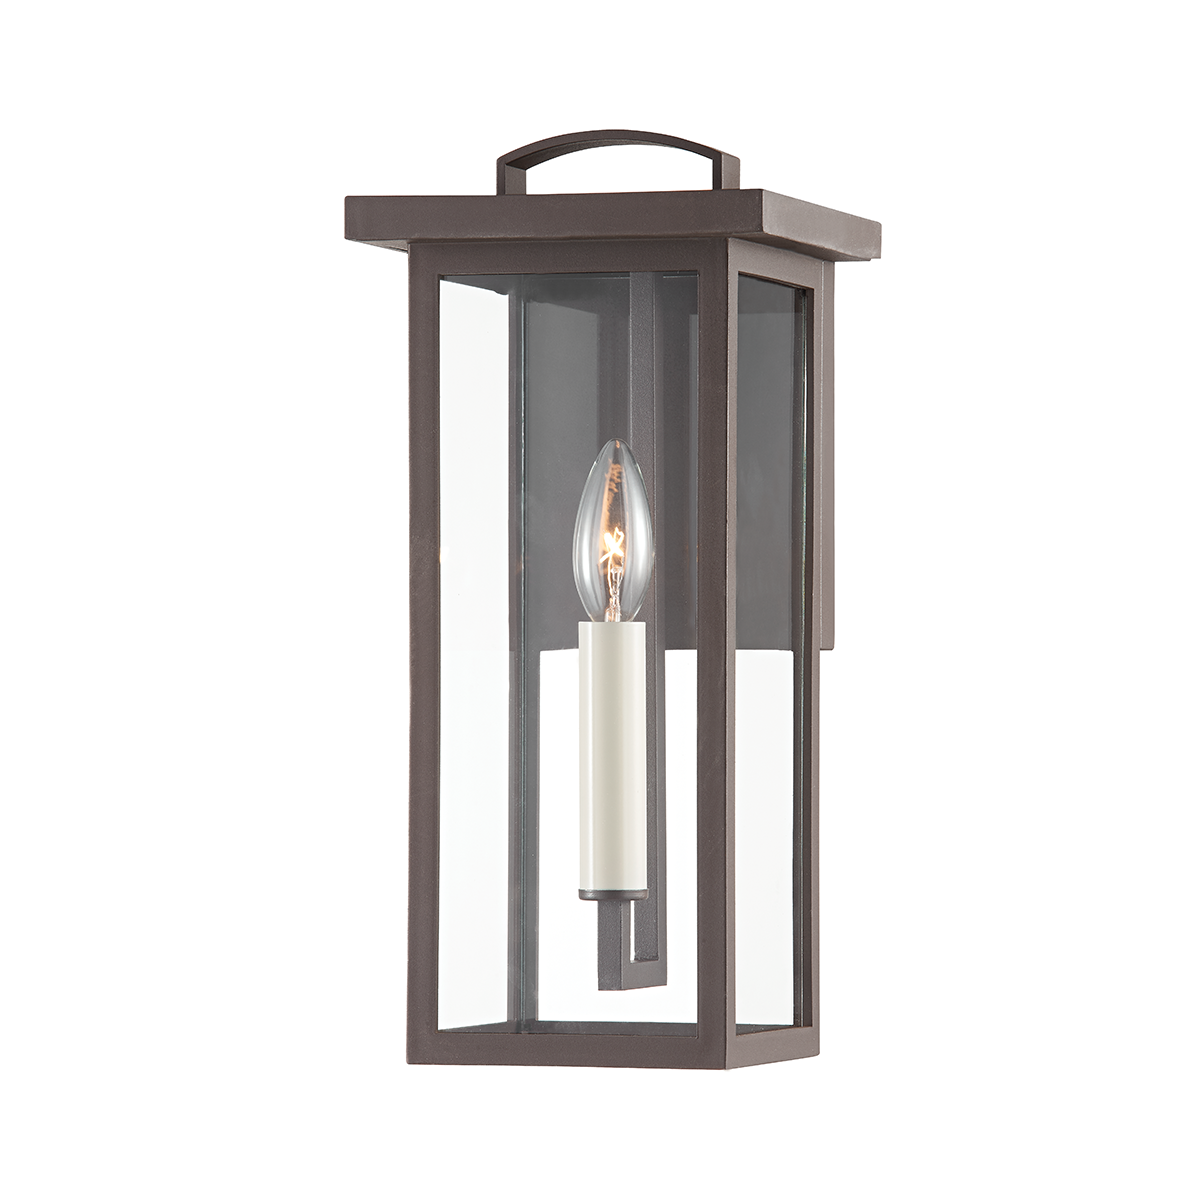 Troy Lighting 1 LIGHT SMALL EXTERIOR WALL SCONCE B7521